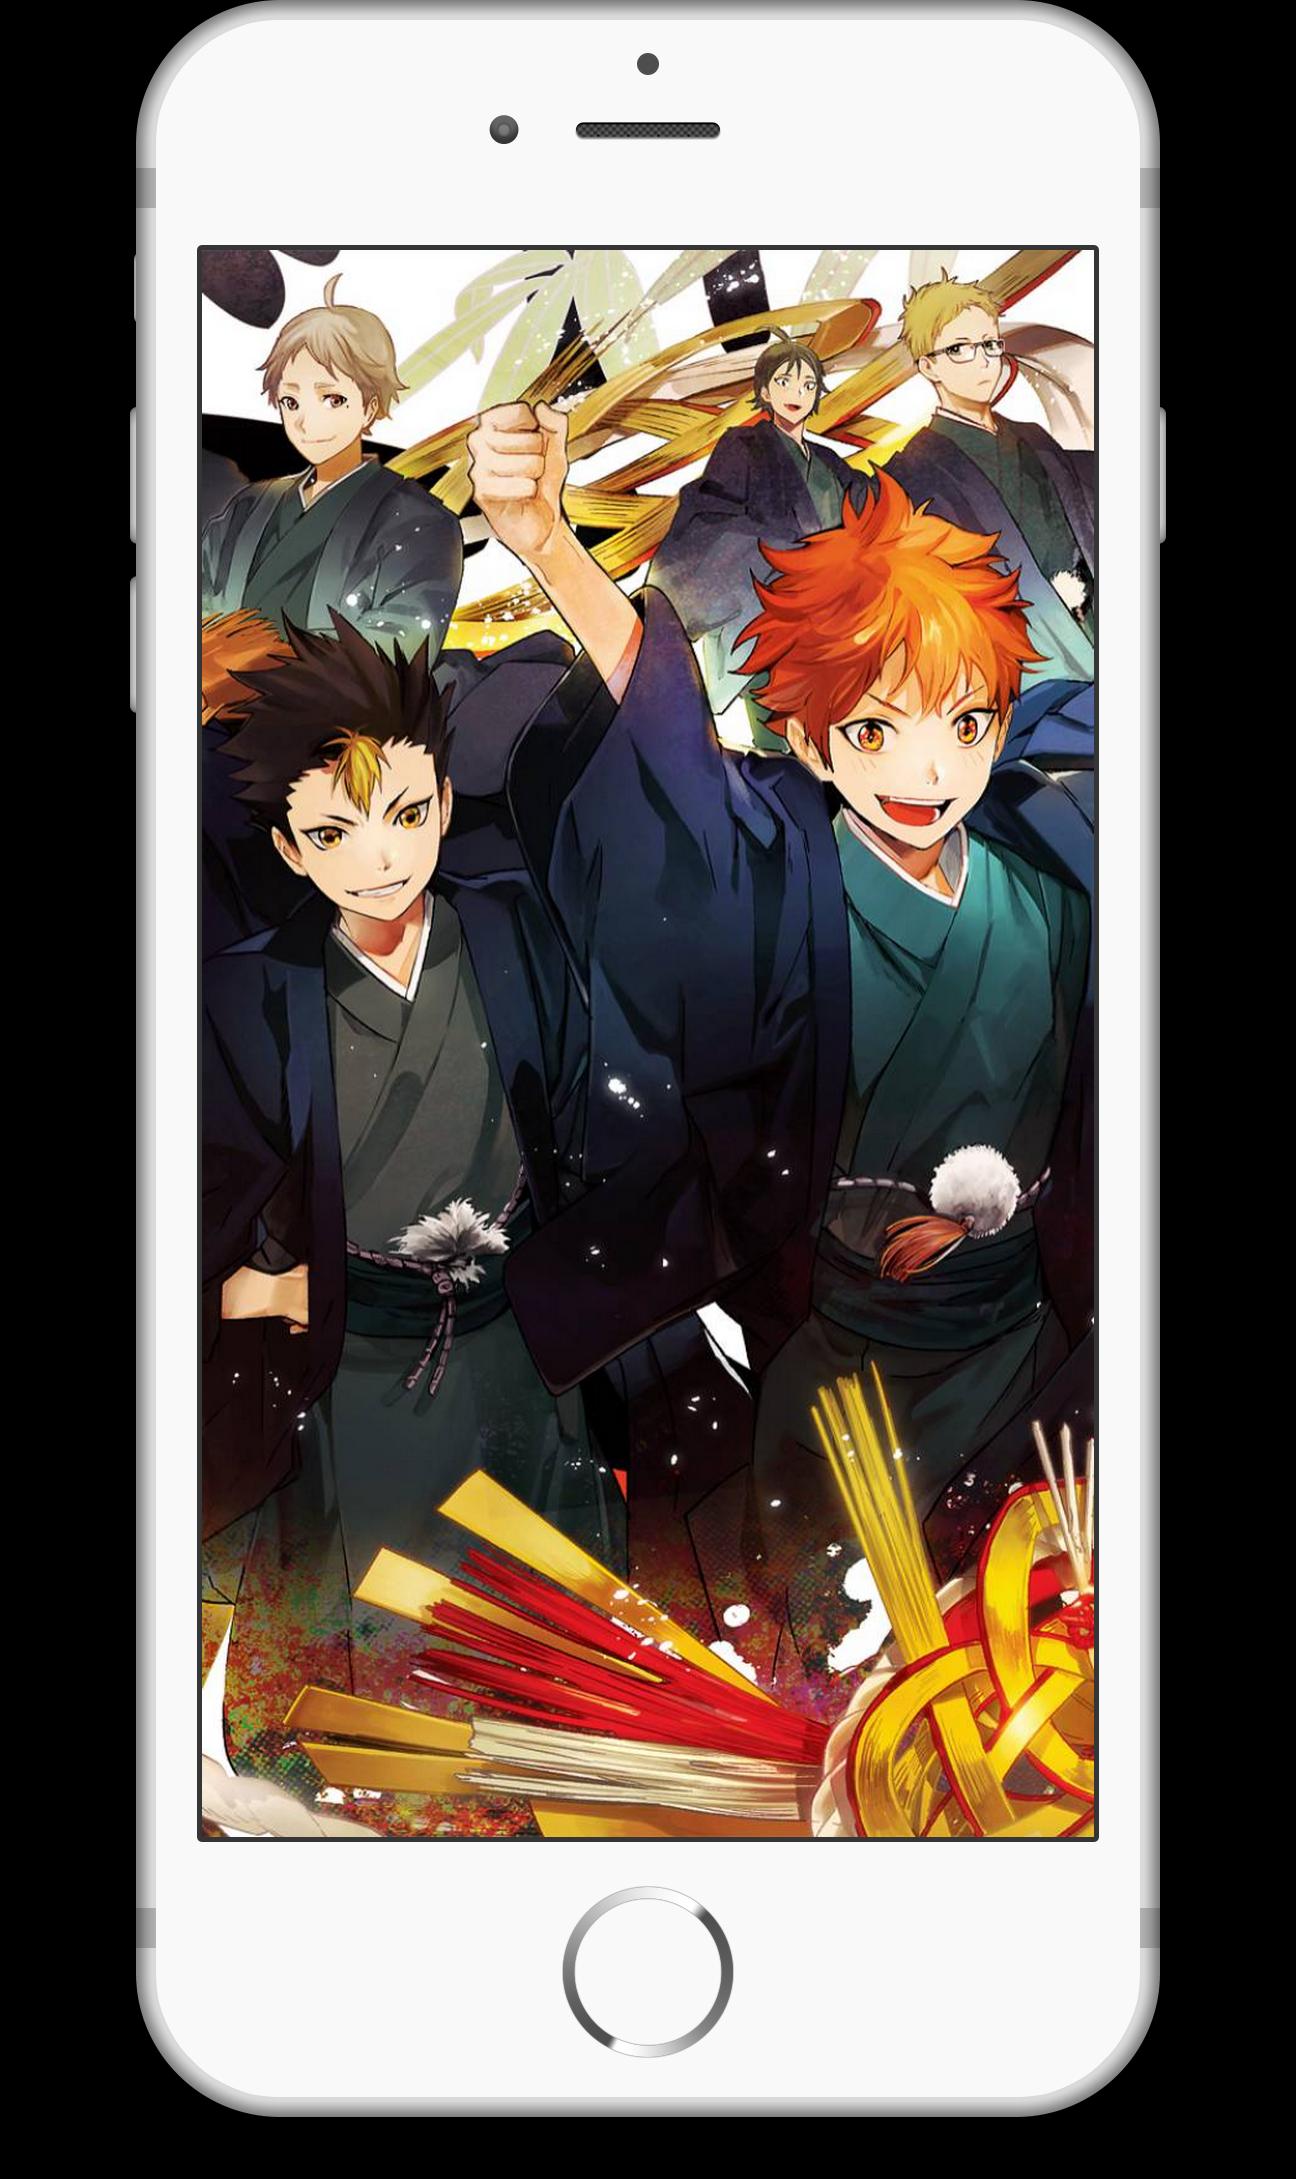 Haikyuu Anime Wallpapers 4K HD 2018 for Android - APK Download